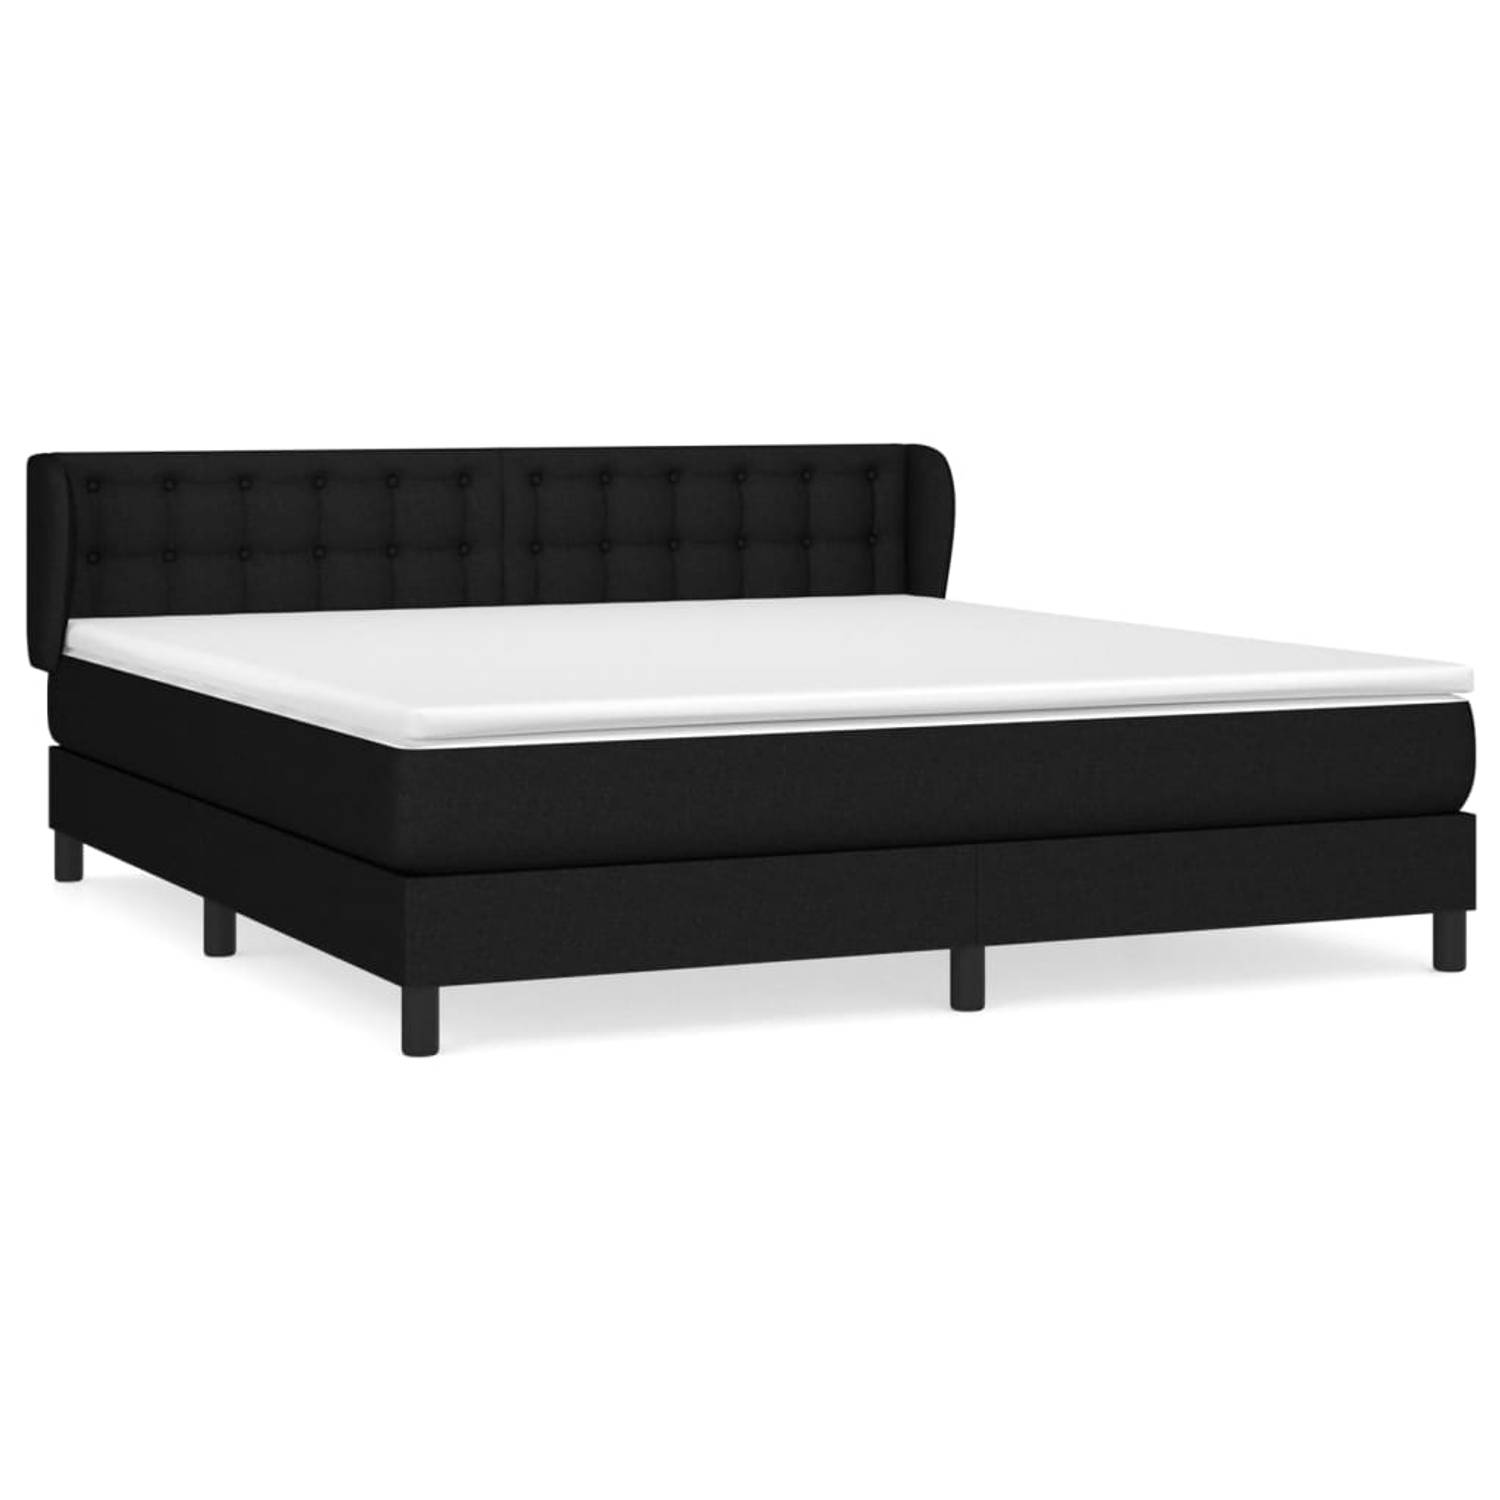 The Living Store Boxspringbed - Comfort - Bed - 160 x 200 x 78/88 - Zwart